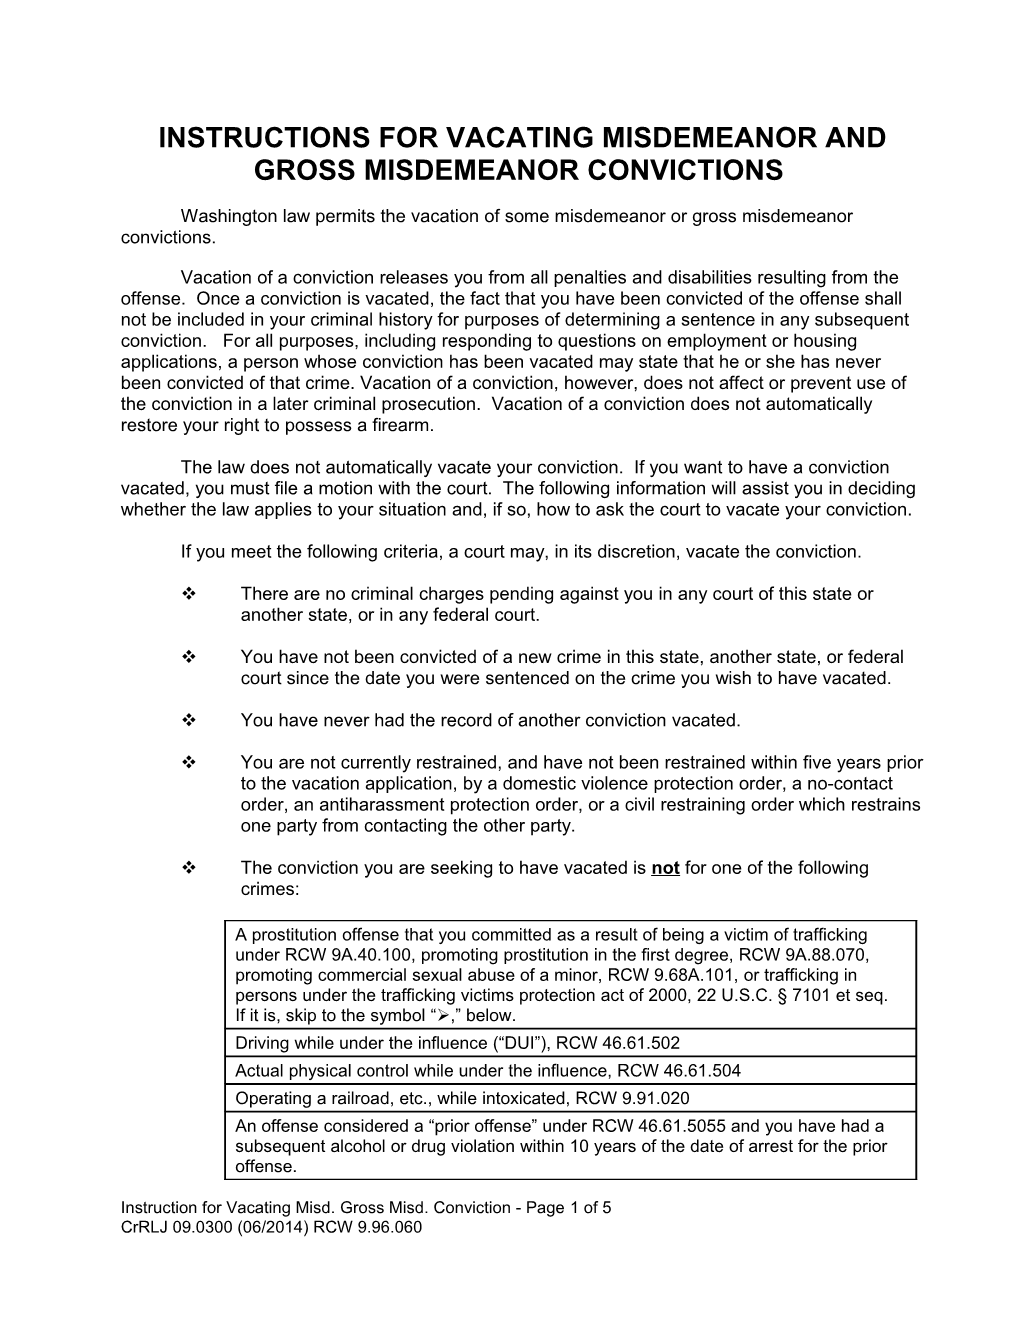 Instructions for Vacating Misdemeanor and Gross Misdemeanor Convictions